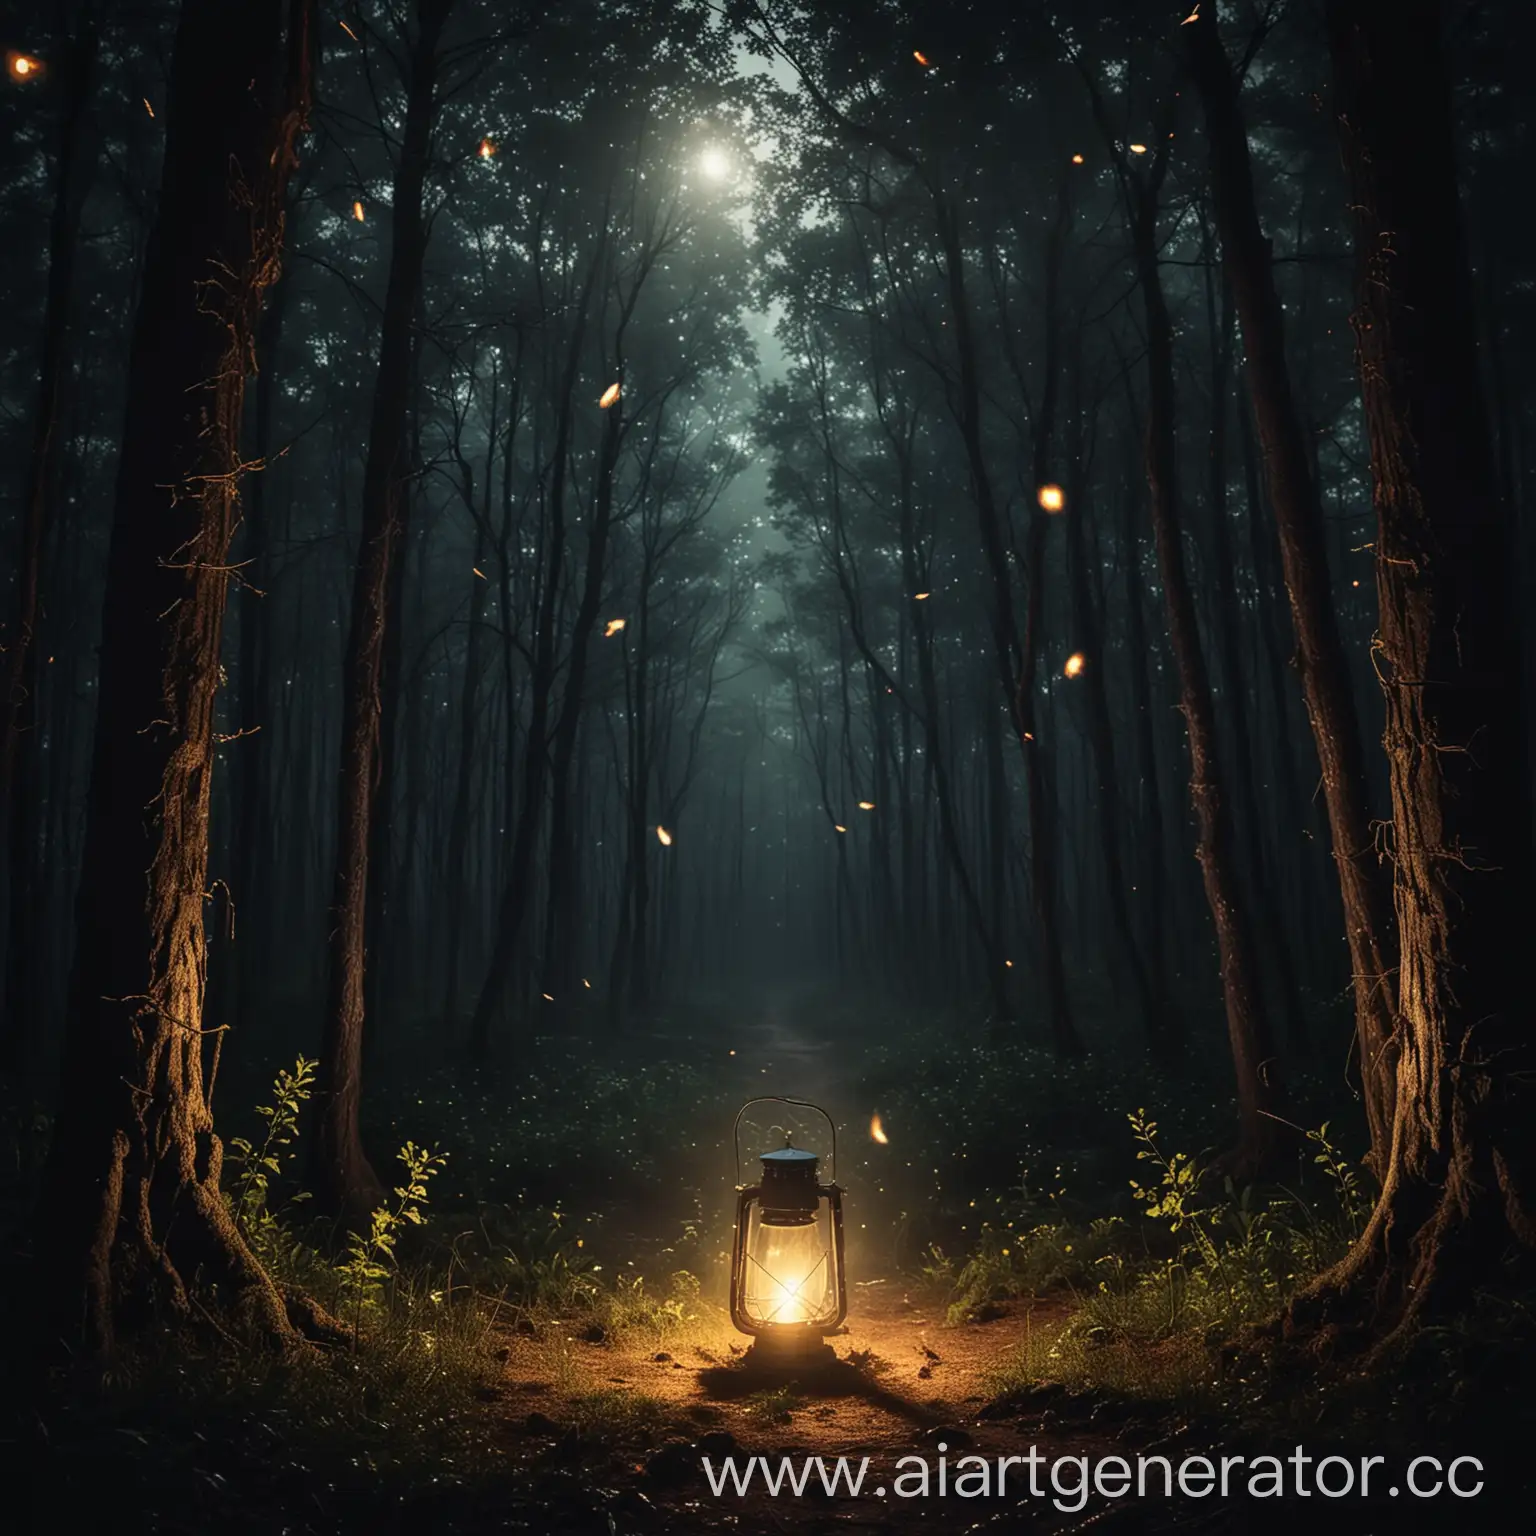 Enchanted-Forest-Lantern-Illuminated-by-Fireflies-at-Night